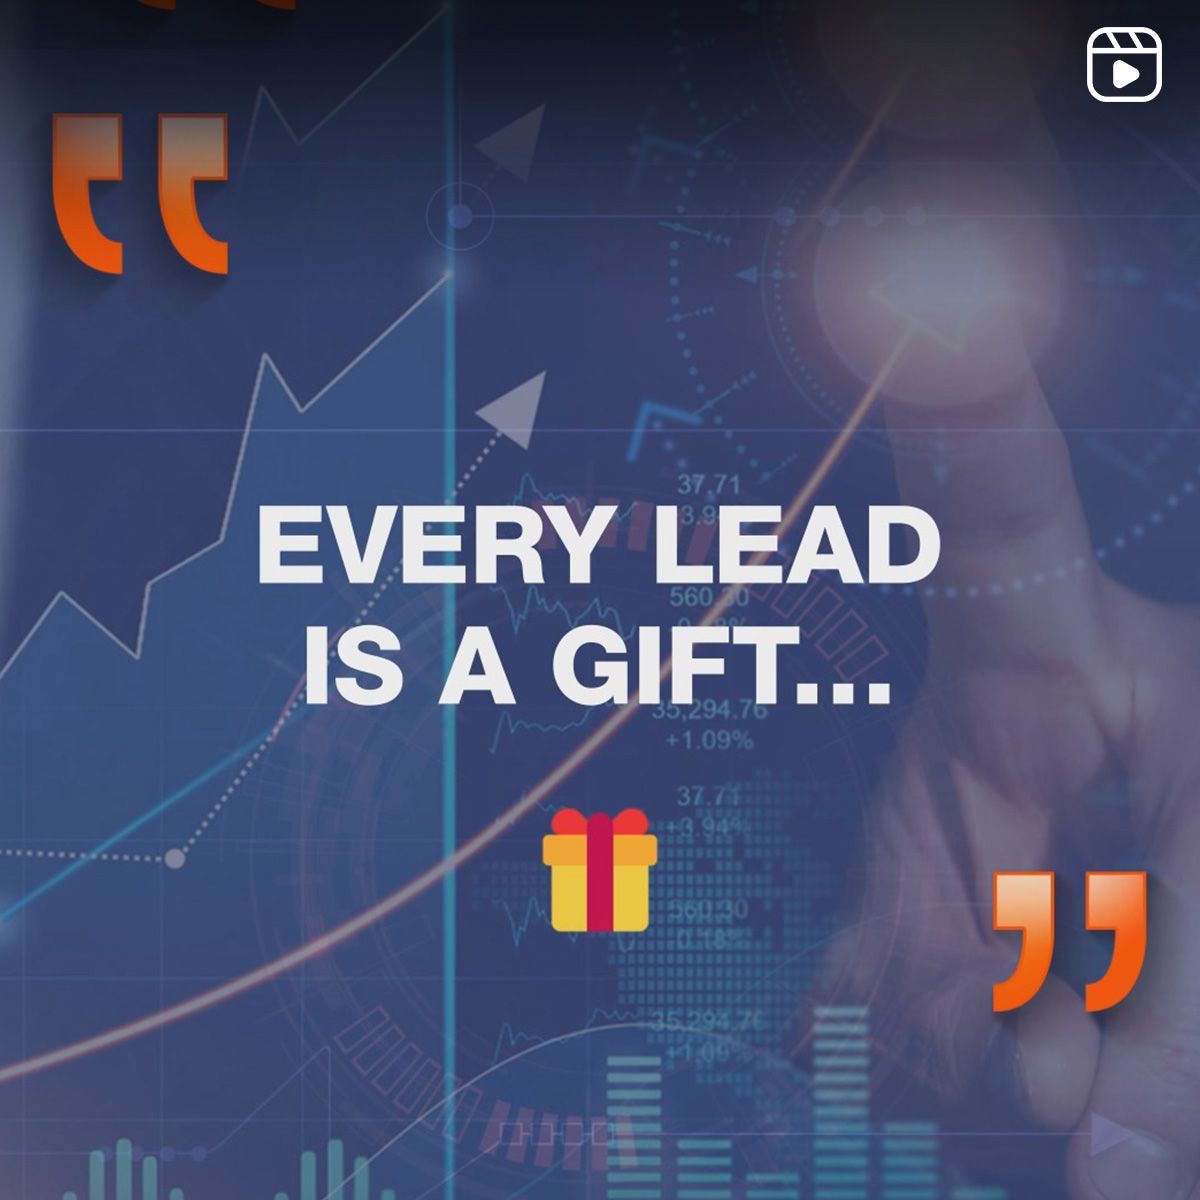 Reel: Every lead is a gift...